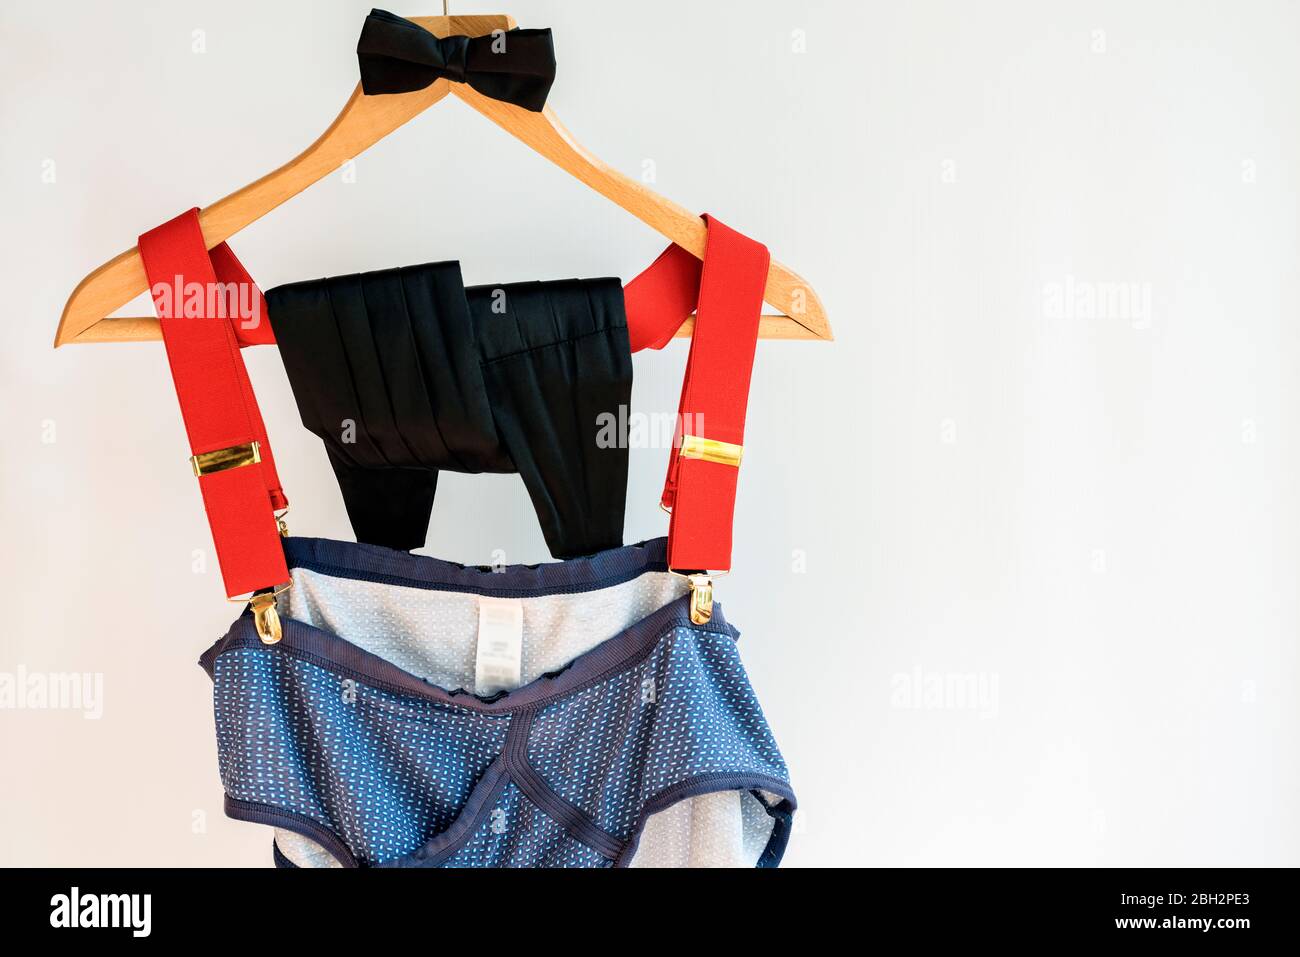 Bow tie, cummerbund, red braces with old underpants hanging from coat hanger Concept; first impression, don’t judge, appearances deceptive, superficial. Stock Photo